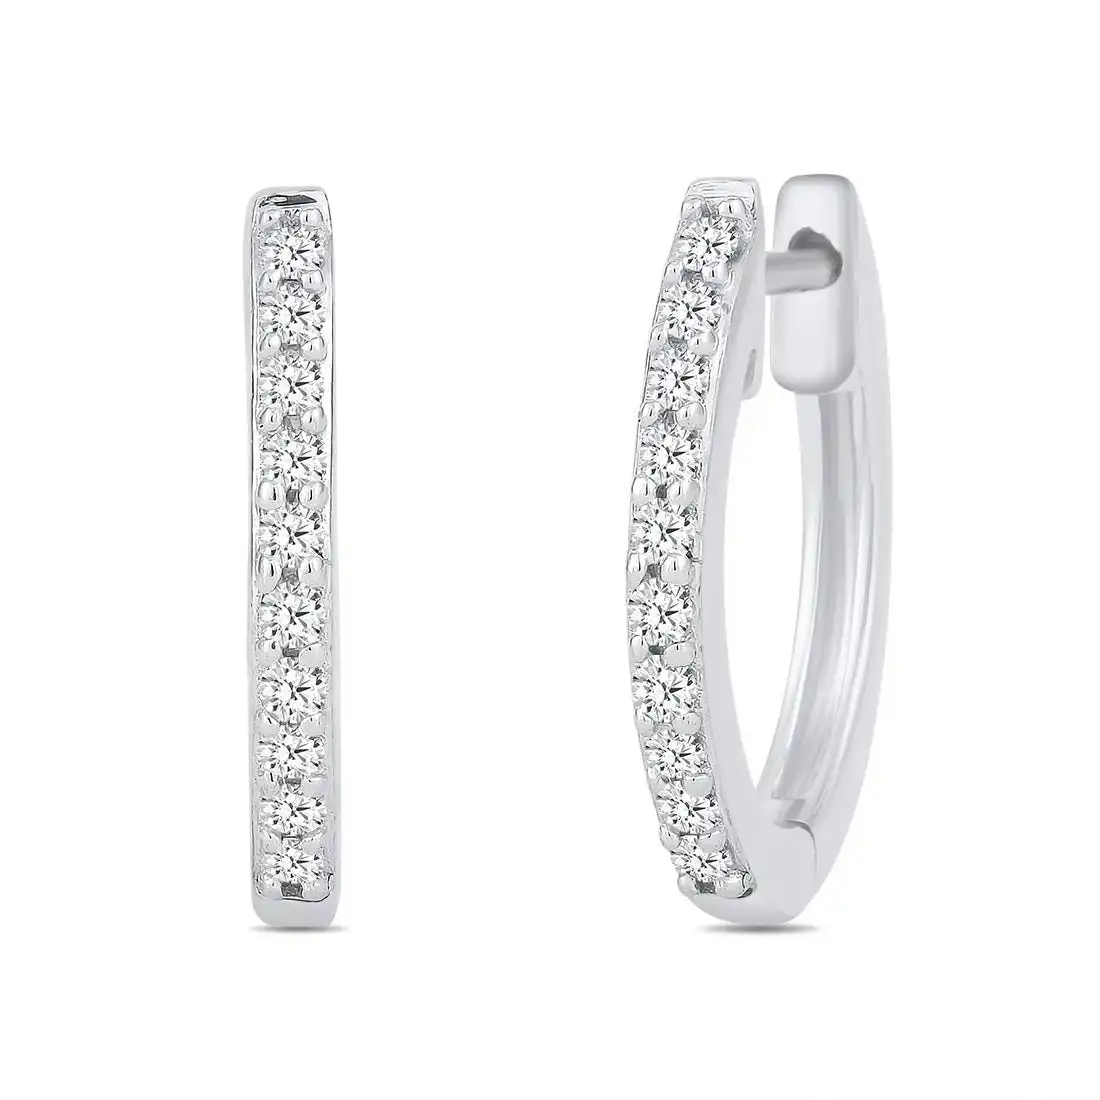 Tia Hoop Earrings with 0.15ct of Diamonds in 9ct White Gold